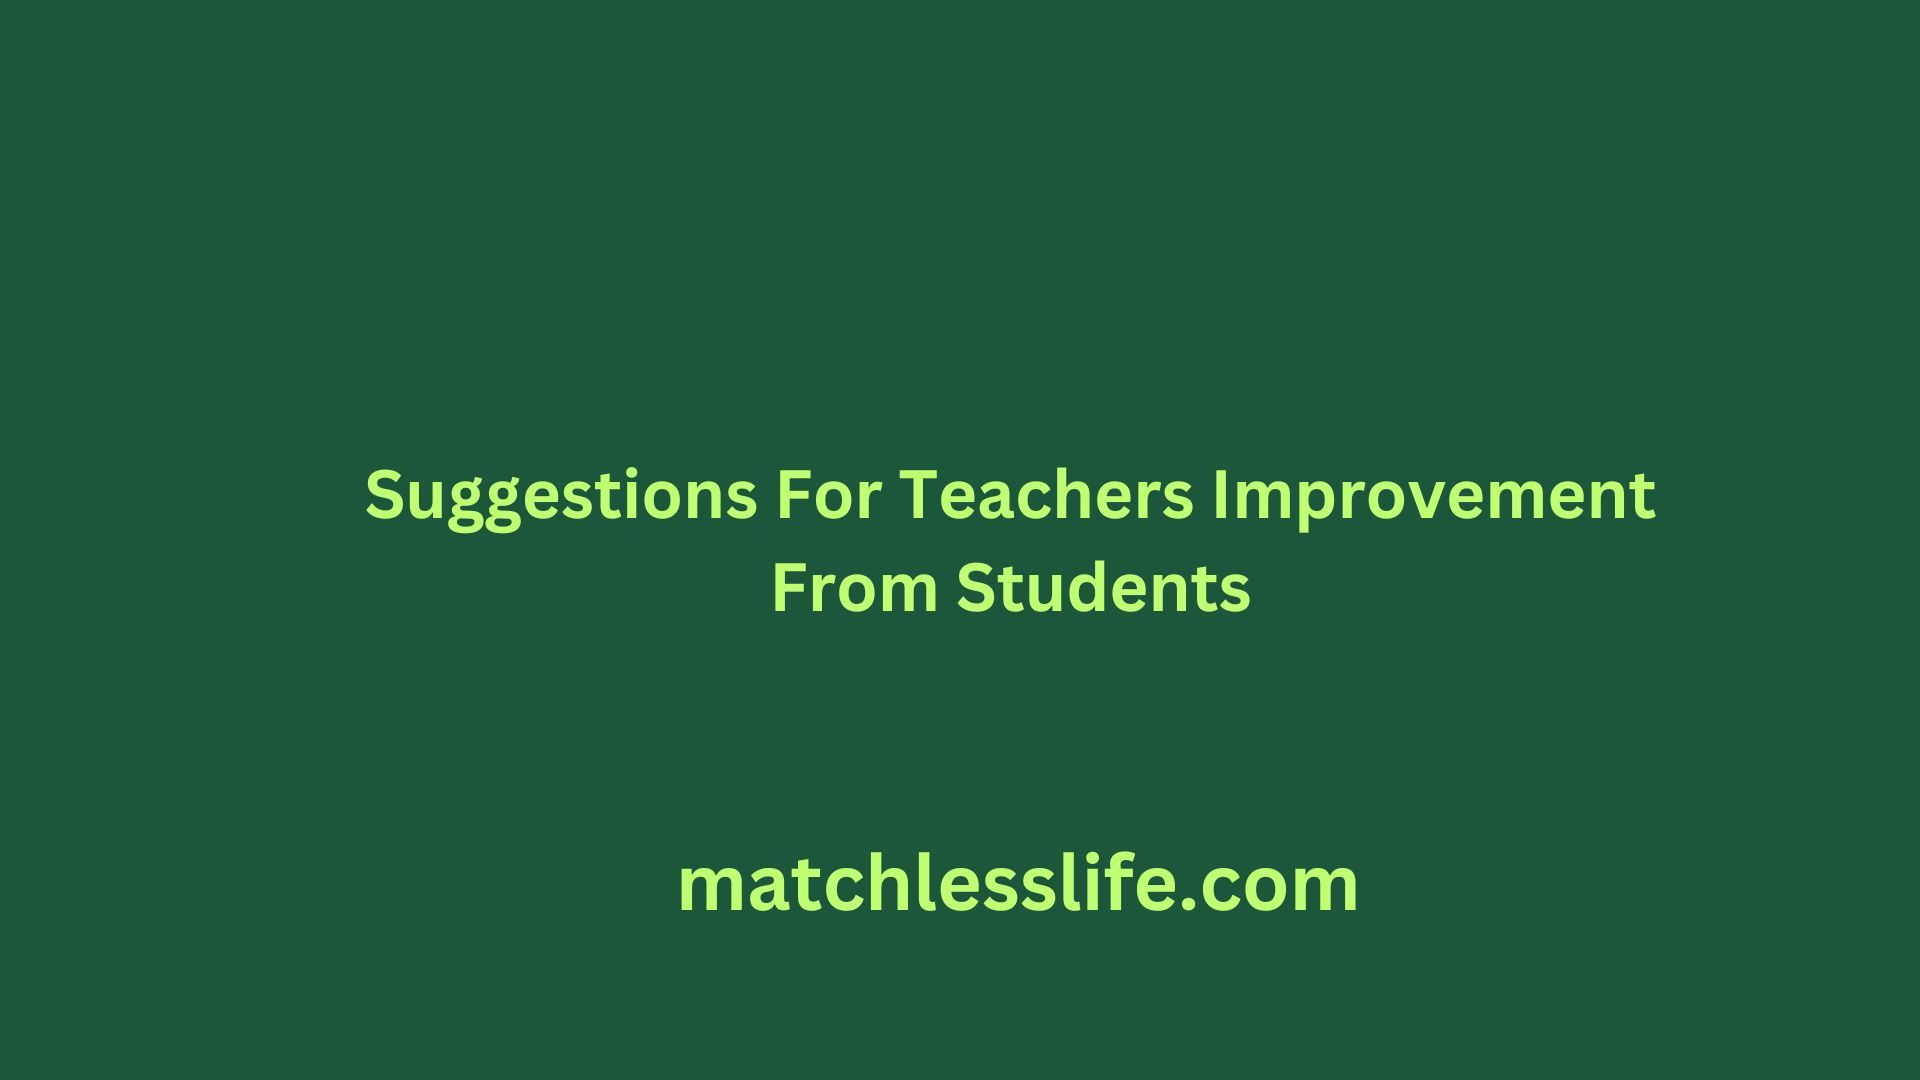 Teachers need feedback from students to get better in their profession. Suggestions for teachers improvement from students will help the teacher get better.